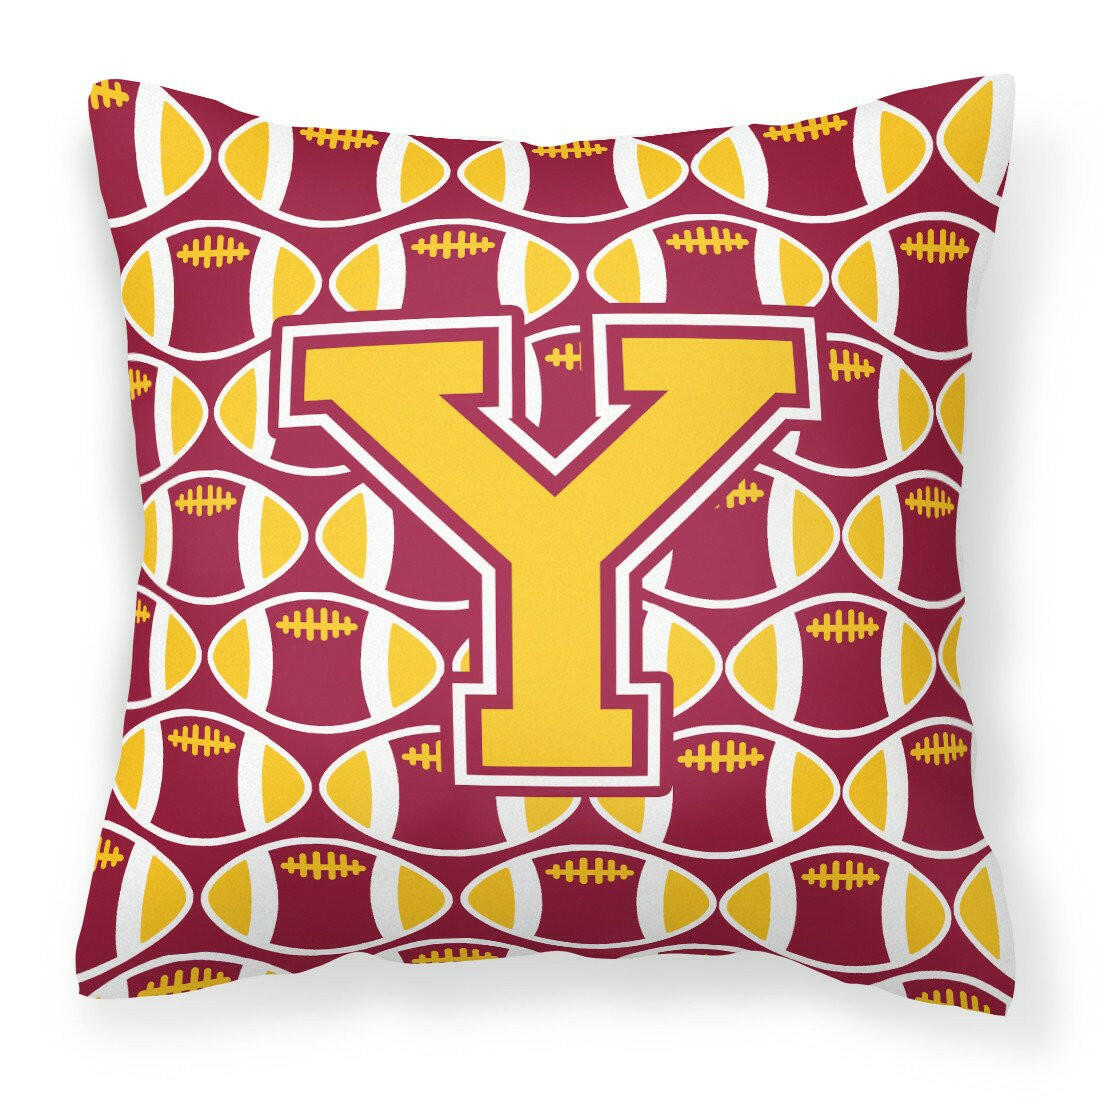 Letter Y Football Maroon and Gold Fabric Decorative Pillow CJ1081-YPW1414 by Caroline's Treasures